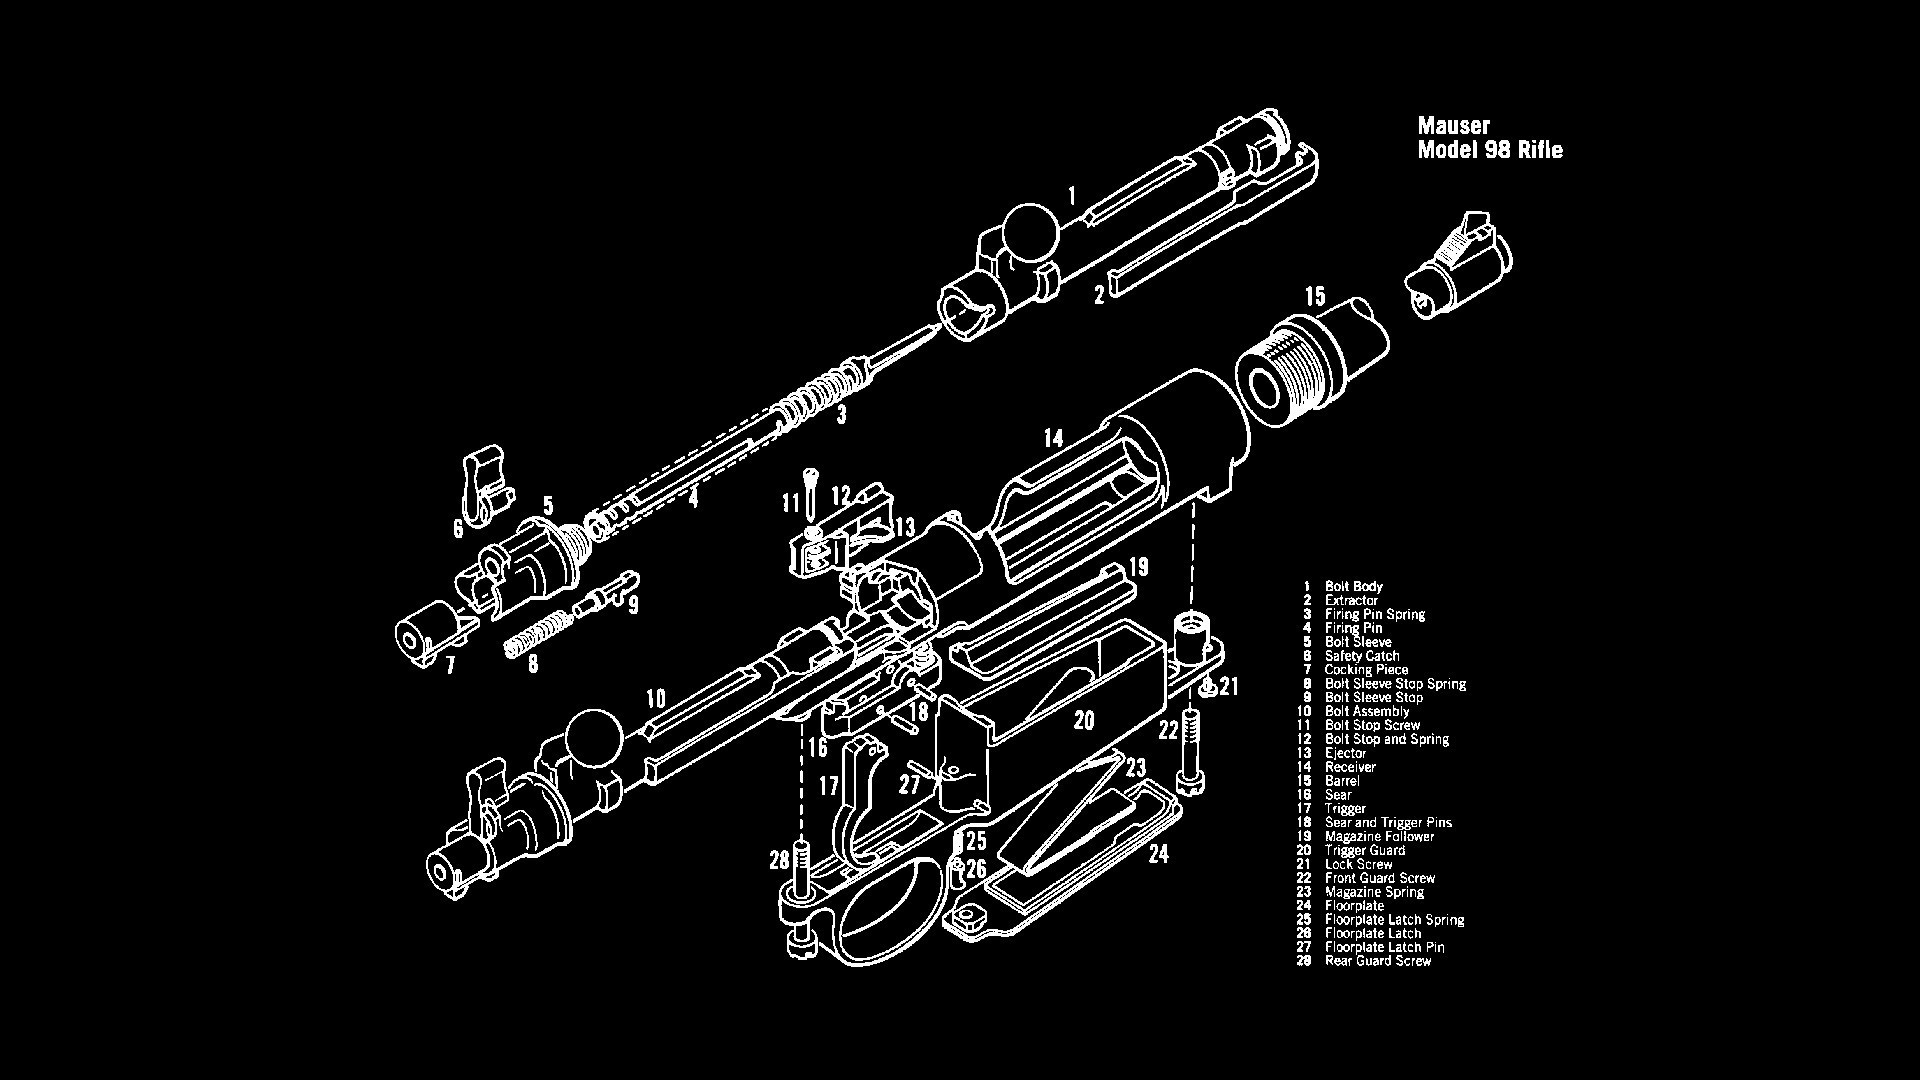 General 1920x1080 exploded-view diagram infographics weapon mauser rifles German firearms gun